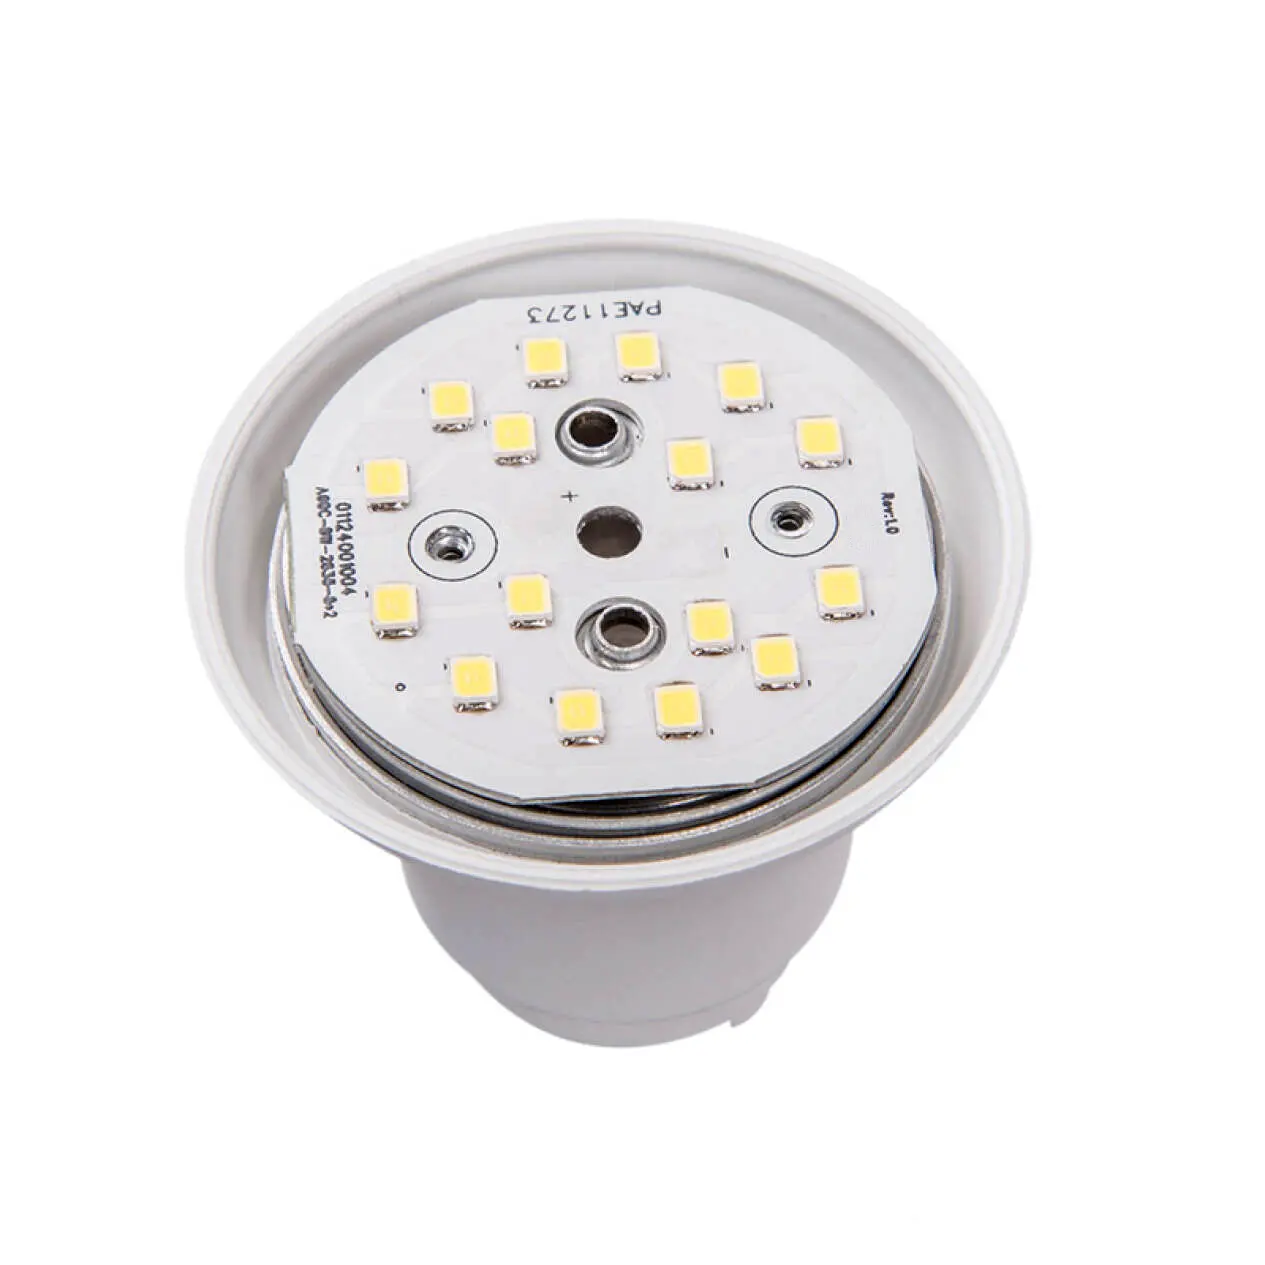 2022 New Low Energy Light 55mm Diameter Size White Appearance Finished Product 5W LED Bulb Light